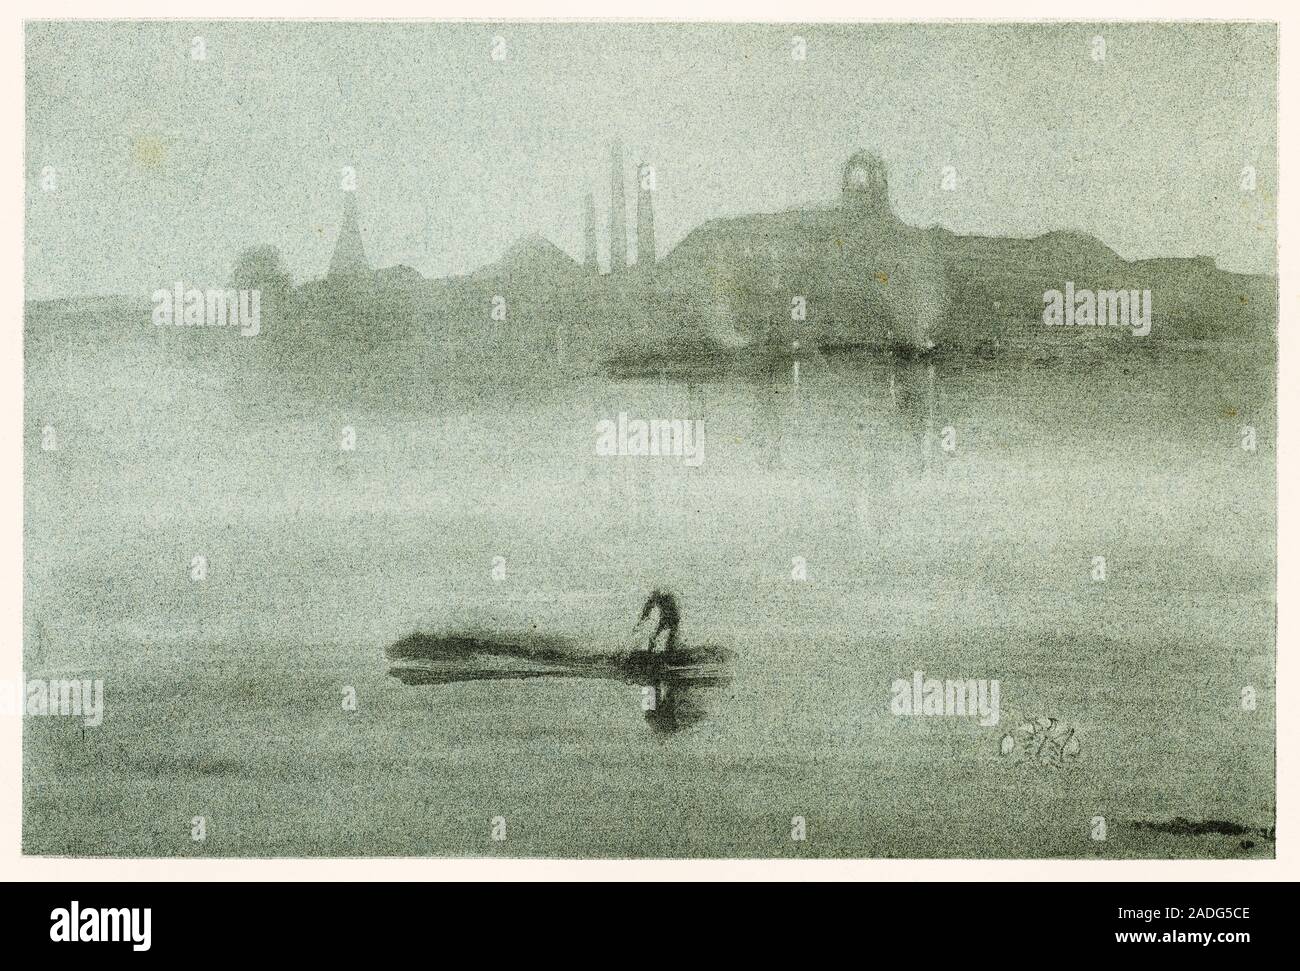 James McNeill Whistler, Nocturne, The River Thames at Battersea, print, 1878 Stock Photo